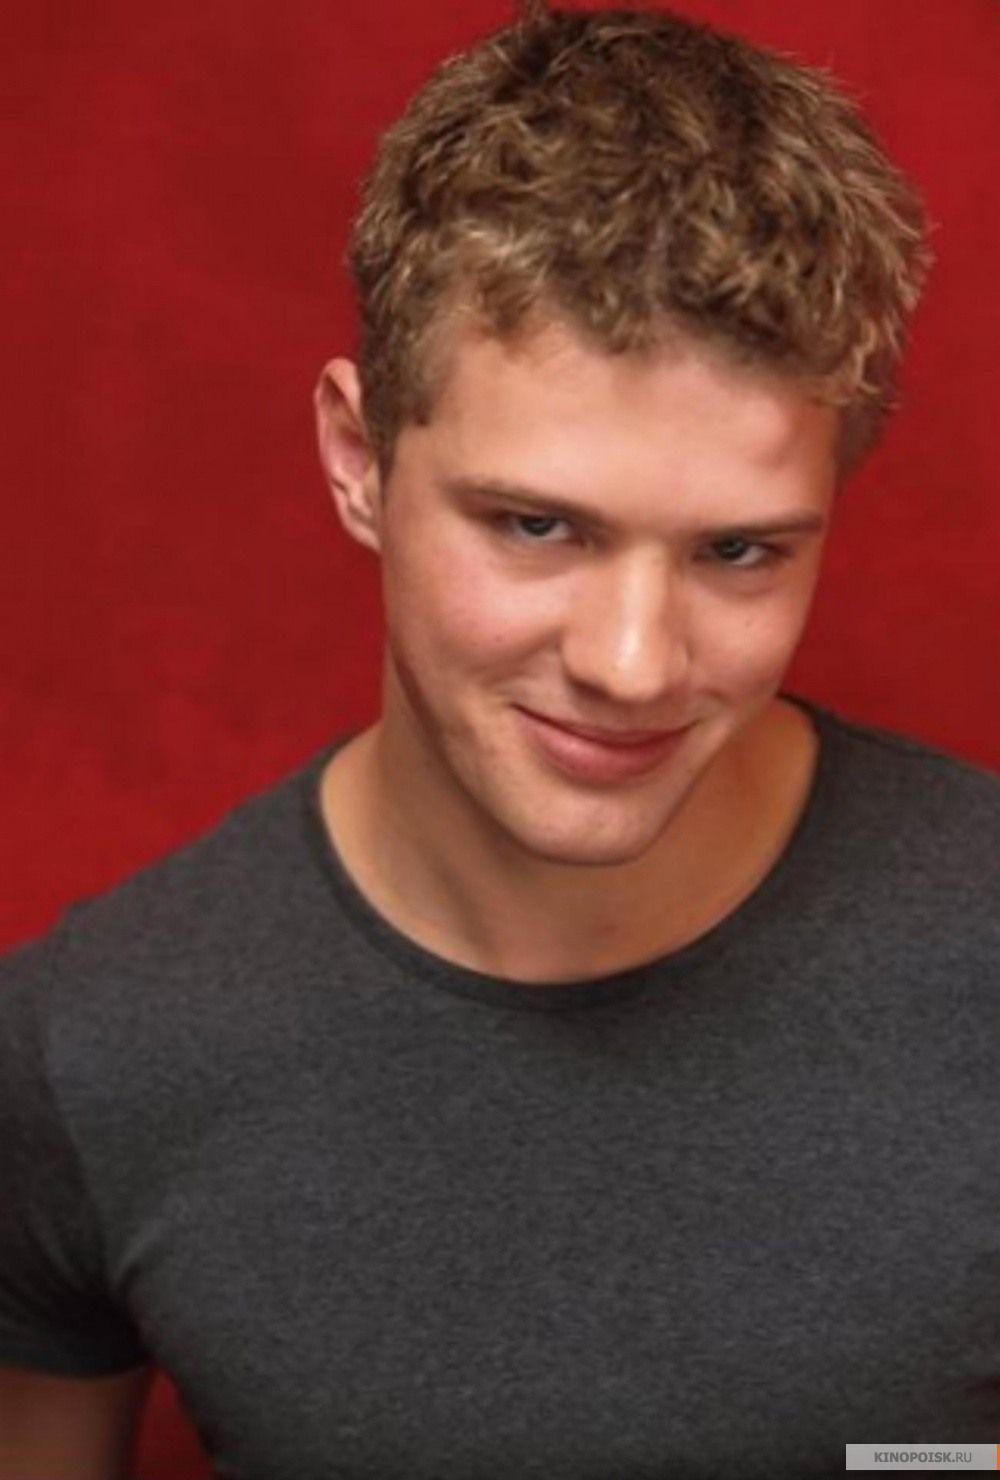 Wallpaper Space Cool: Ryan Phillippe